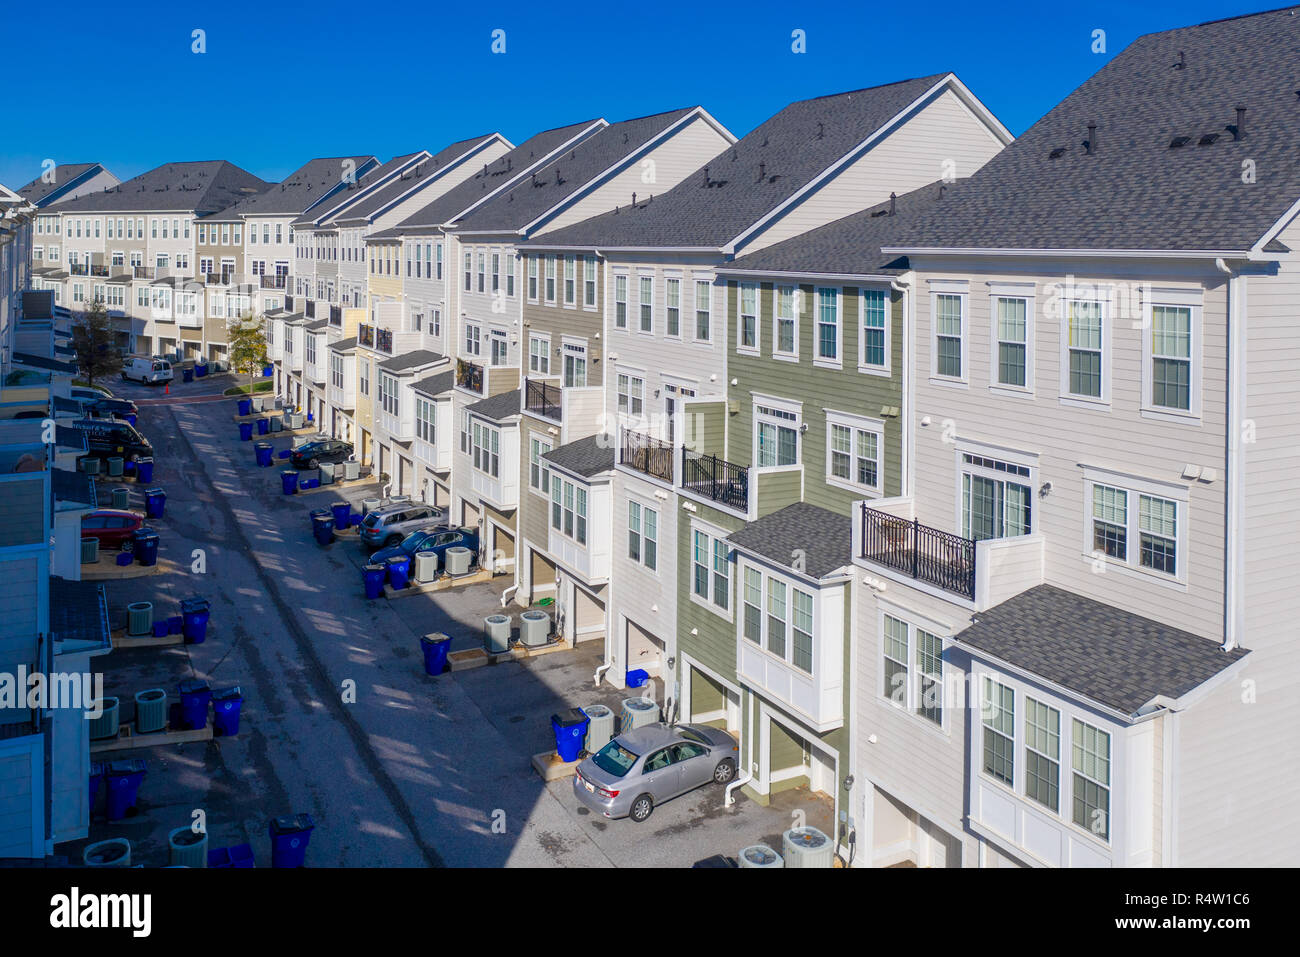 Maple Lawn luxury multi storey town homes, town houses USA real estate with blue sky Stock Photo